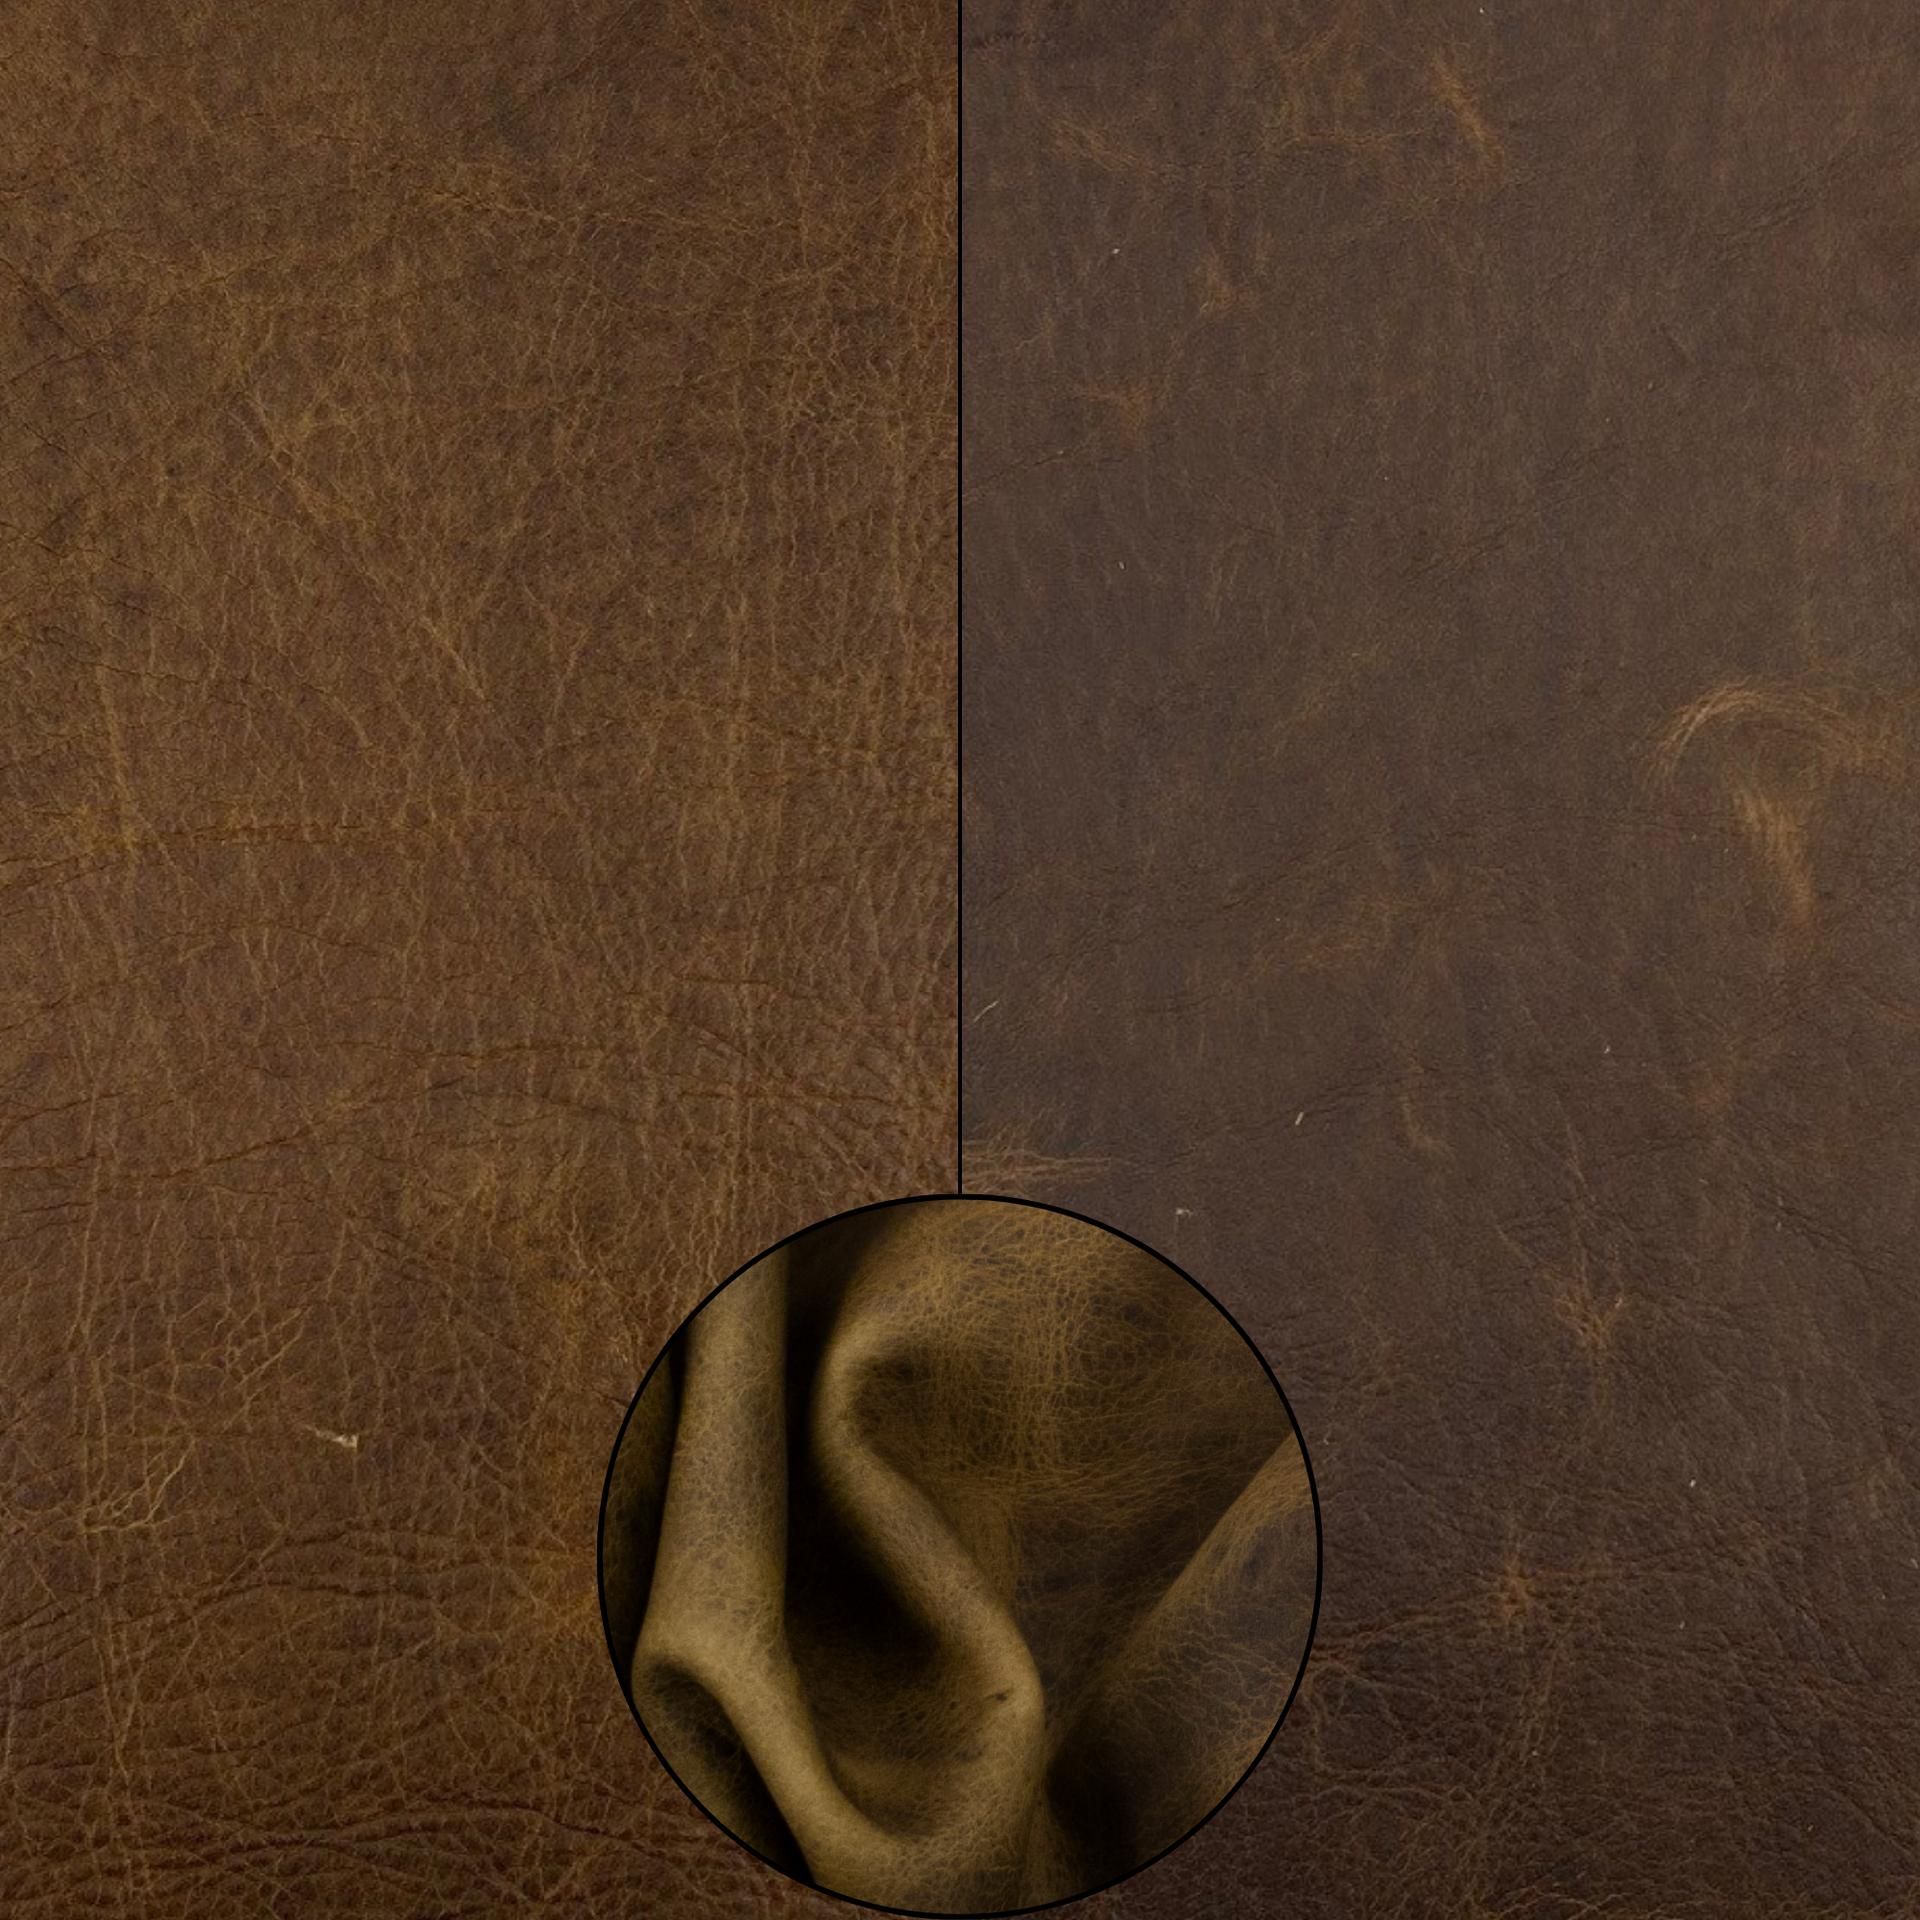 Golden Acorn Brown, 6.5-32 SqFt, 2-3 oz, Pull up Sides & Pieces, Crazy Buffalo,  | The Leather Guy